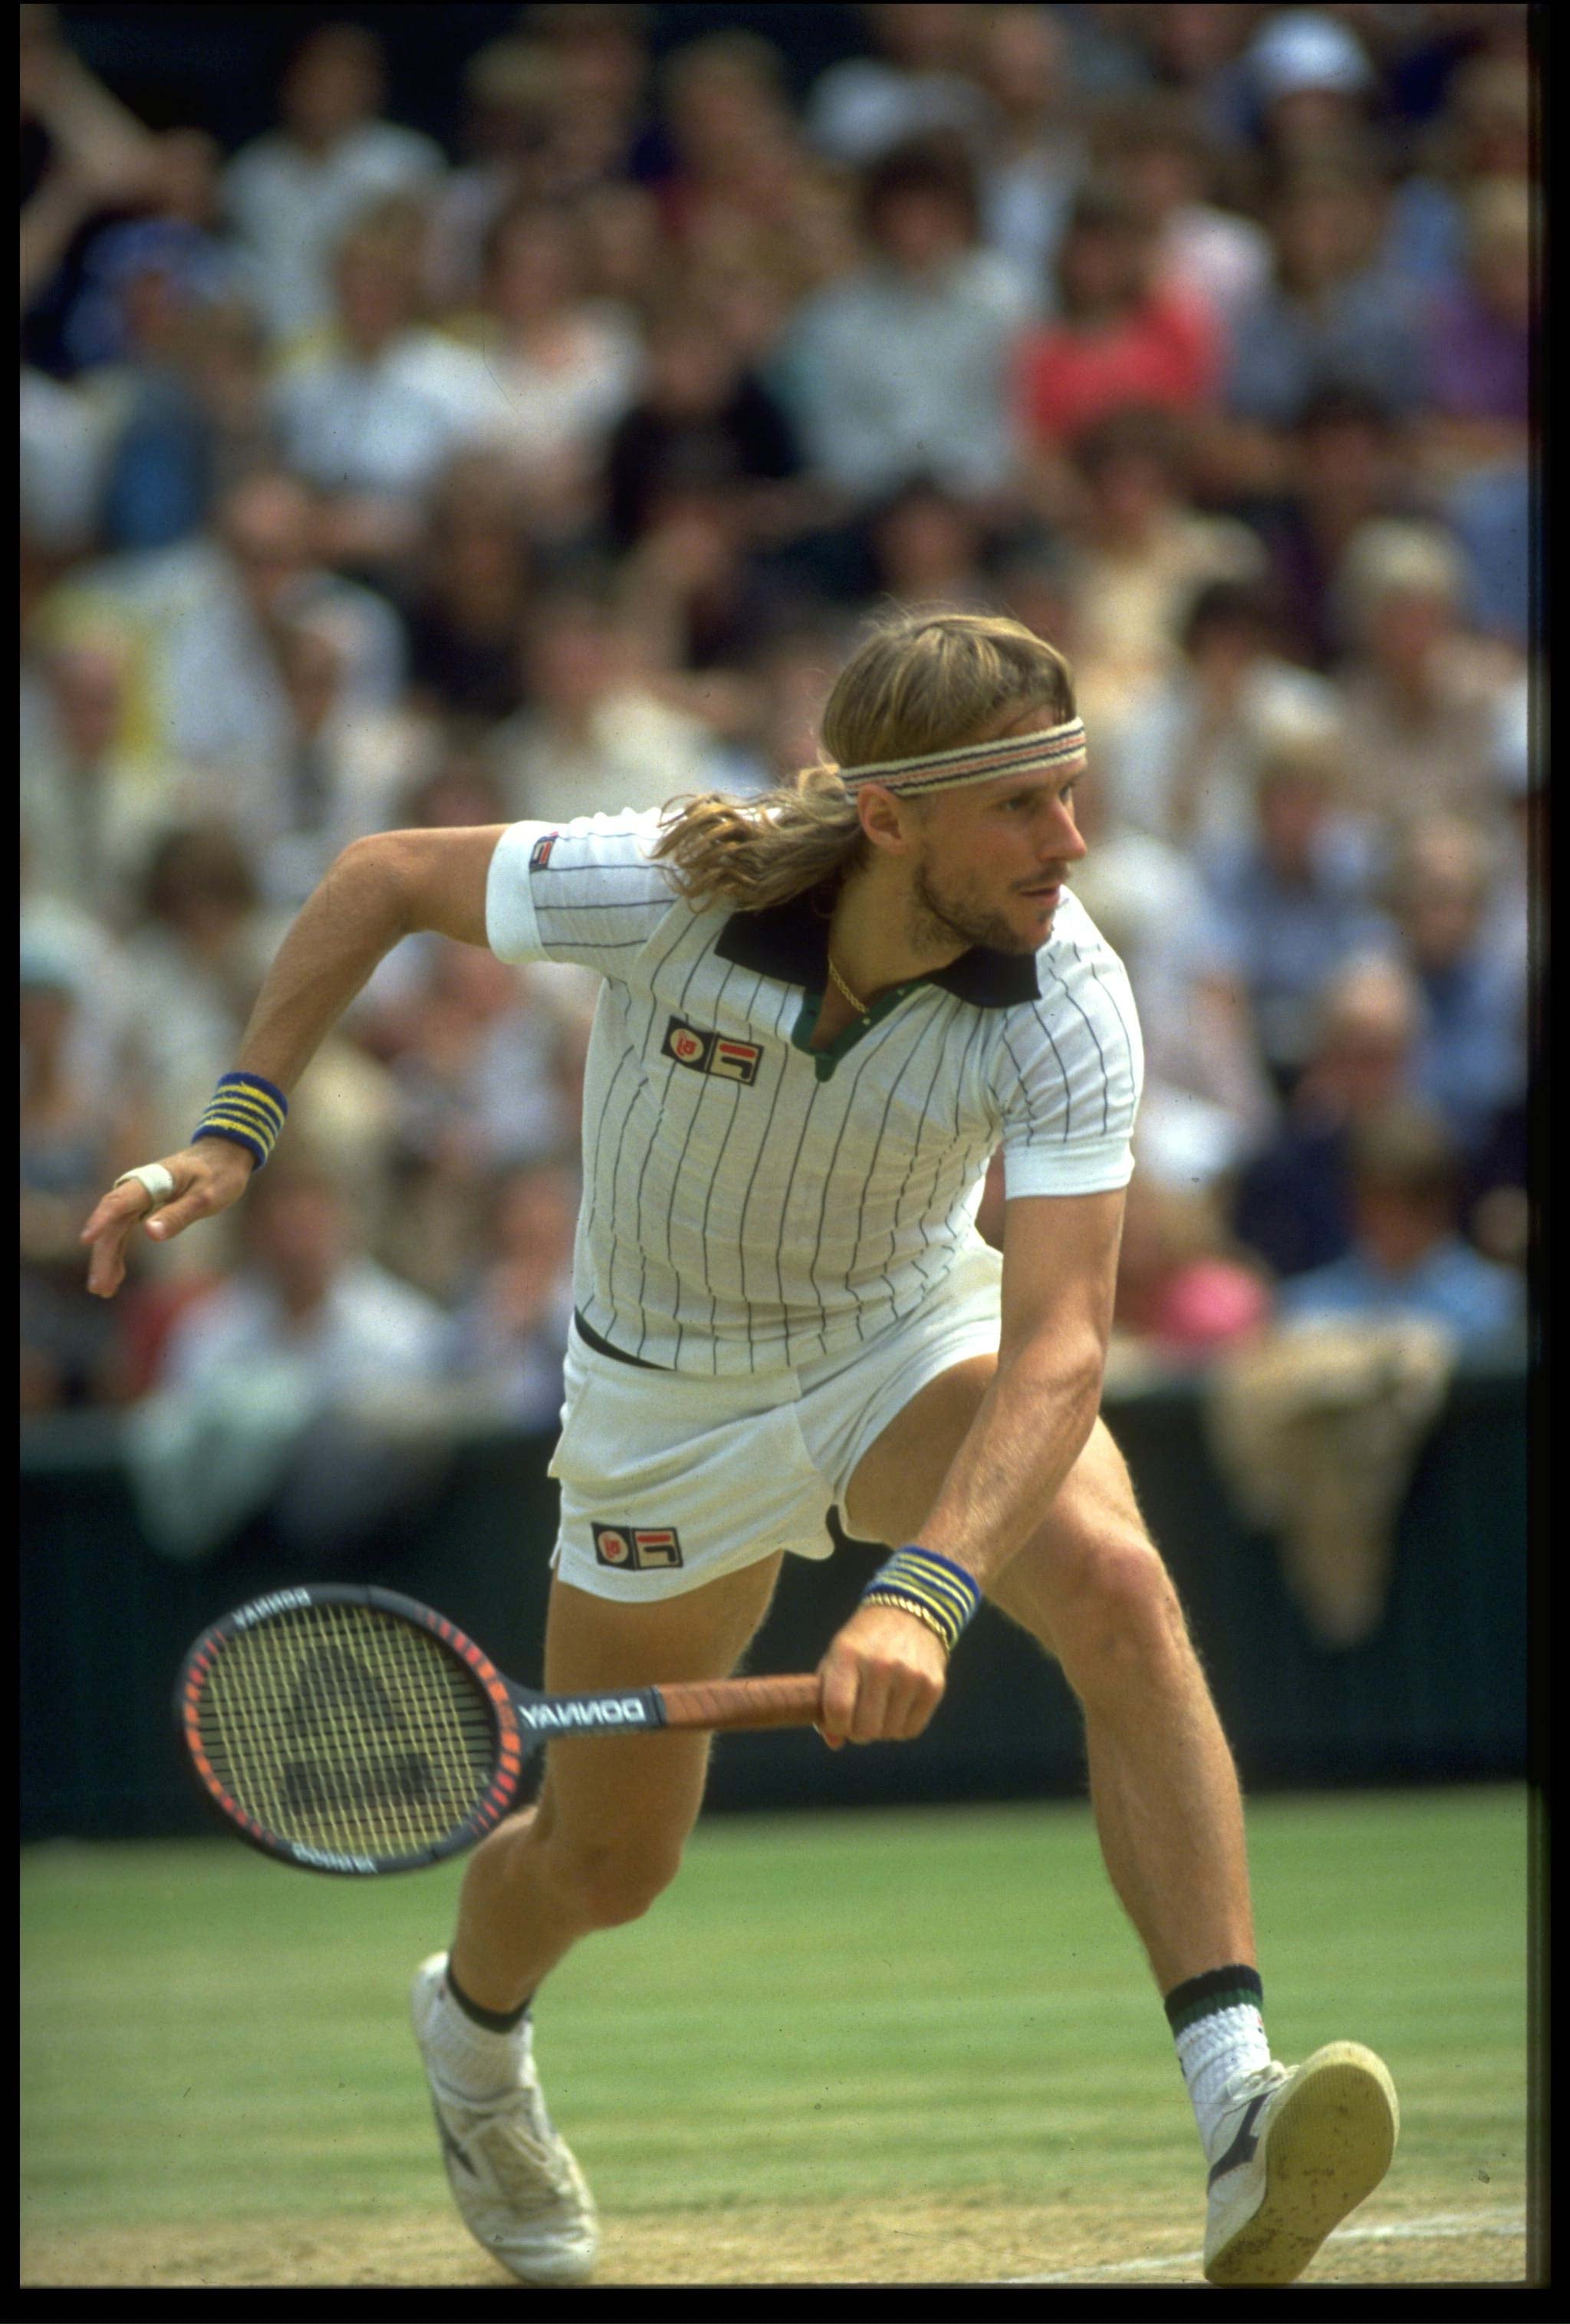 Who could ever forget the iconic tennis player Bjorn Borg in his We